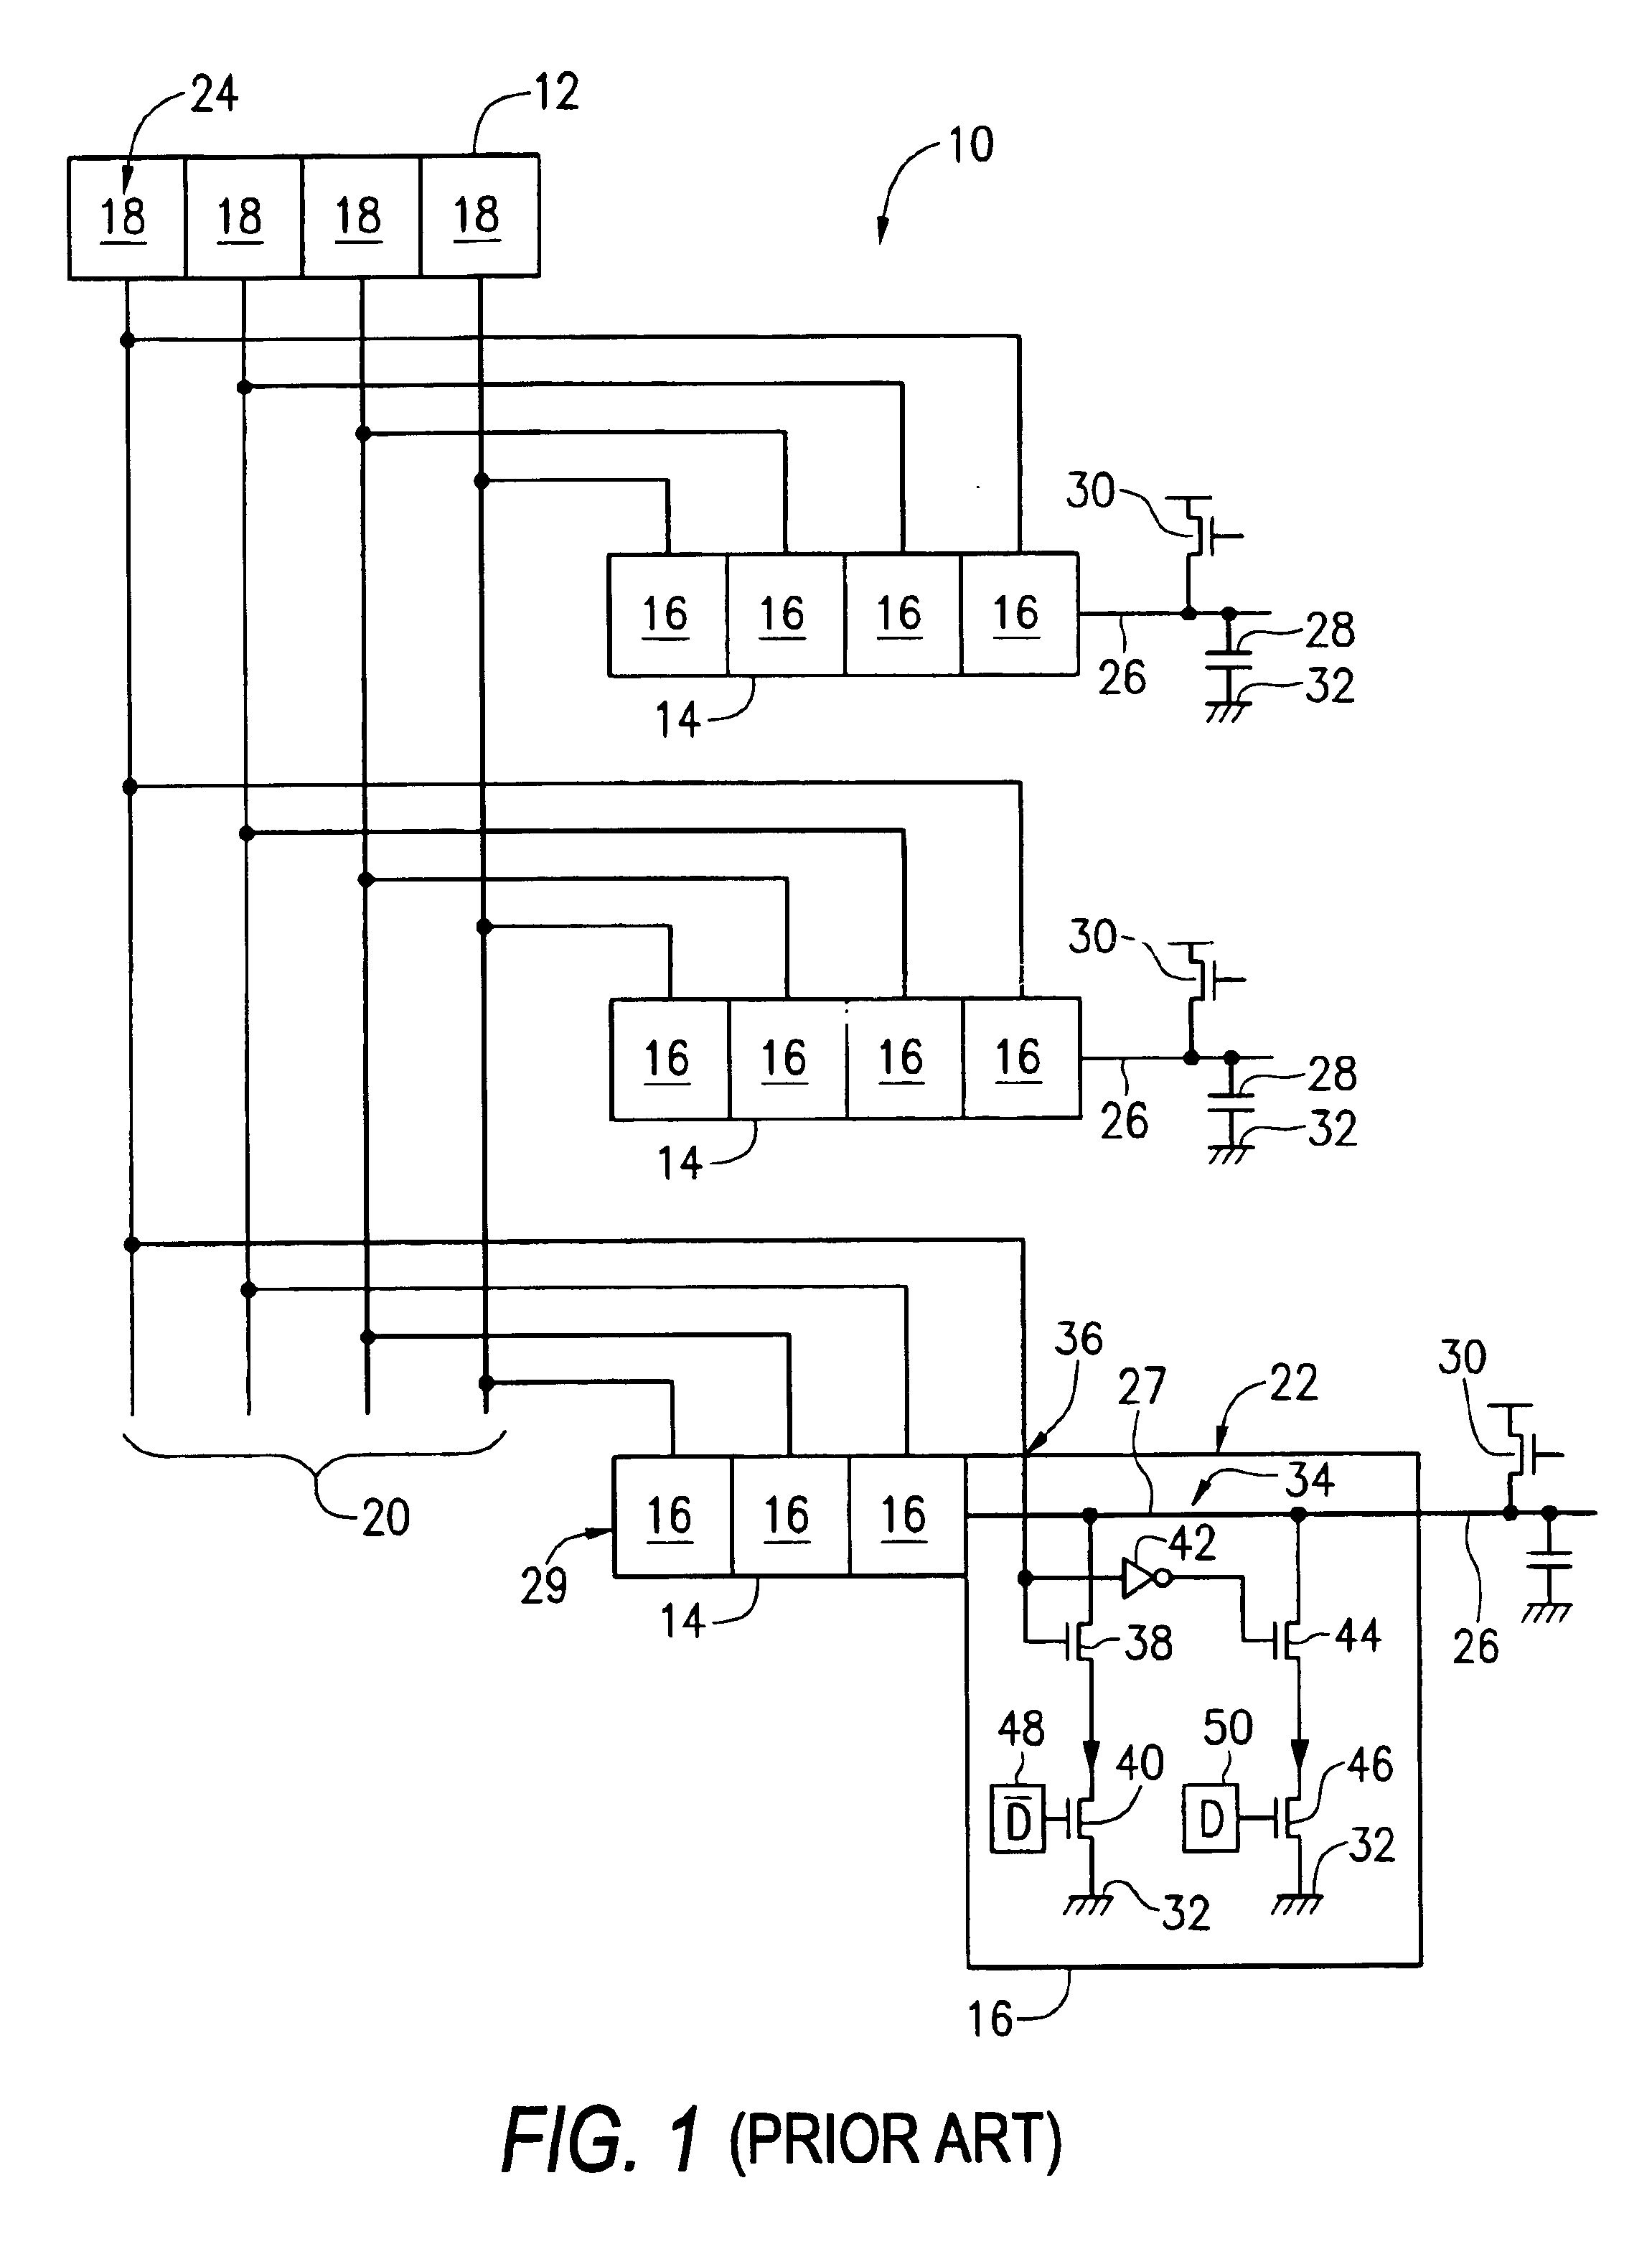 CAM memory architecture and a method of forming and operating a device according to a CAM memory architecture